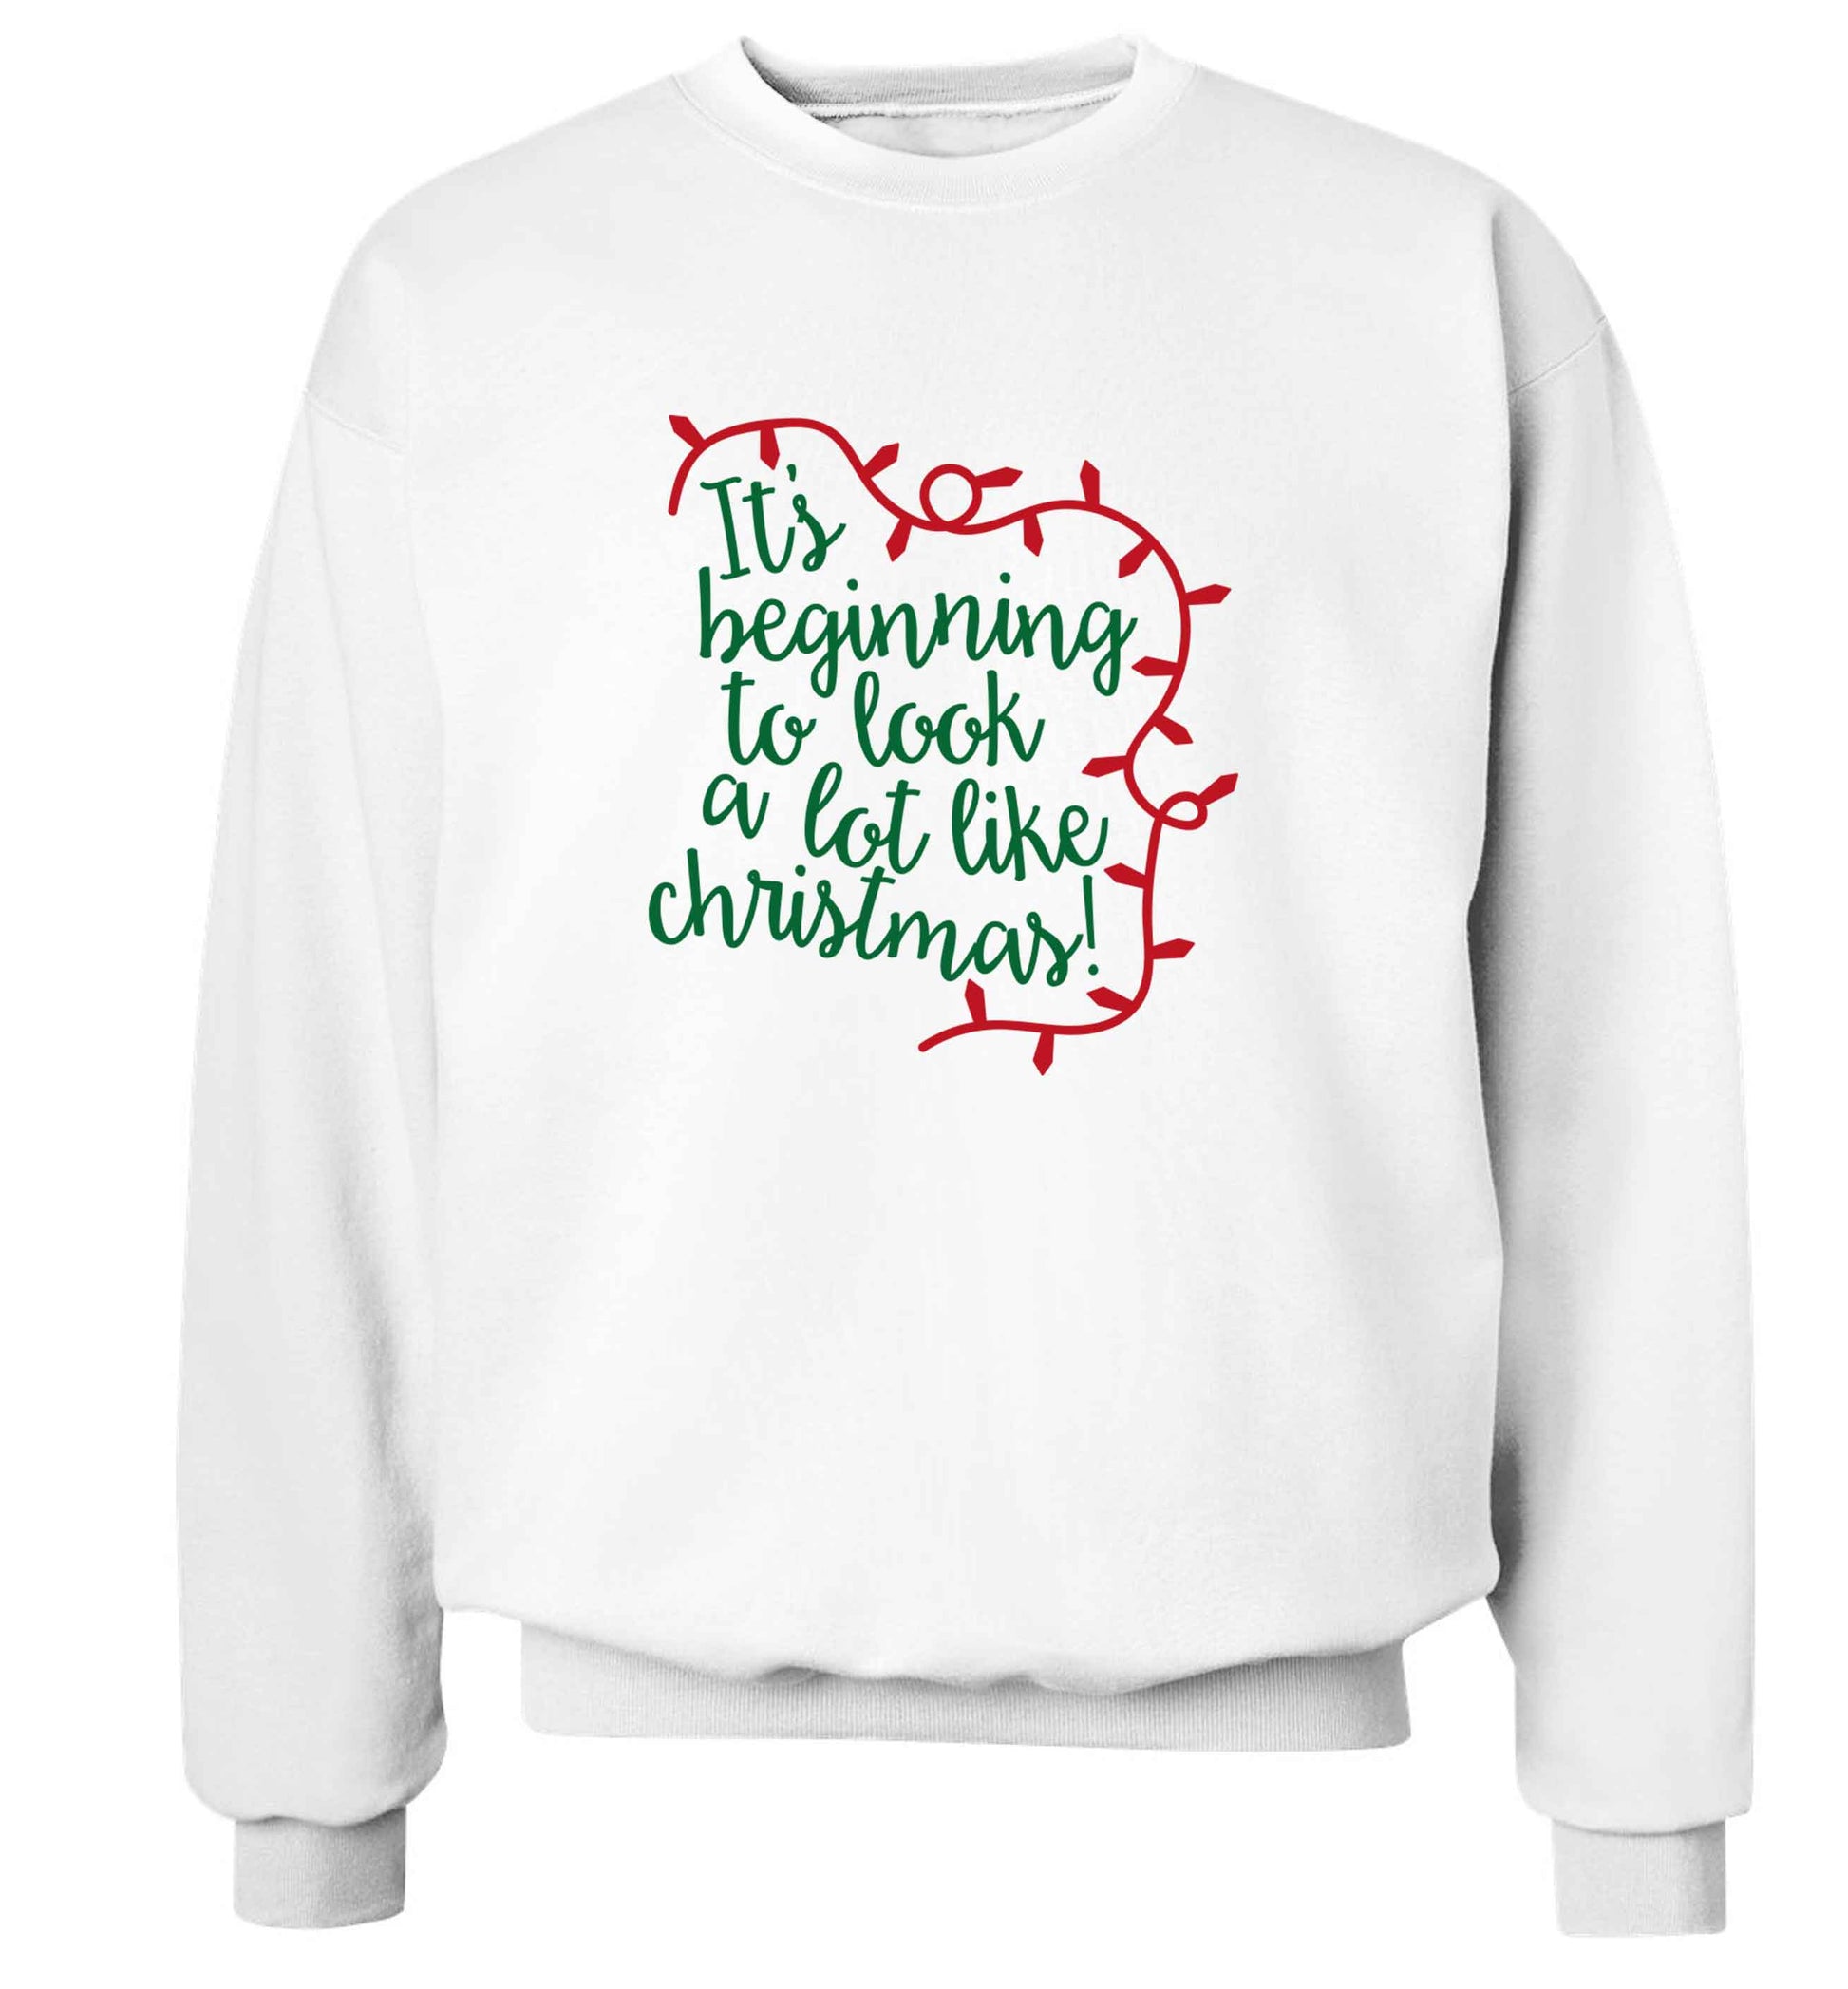 It's beginning to look a lot like Christmas adult's unisex white sweater 2XL